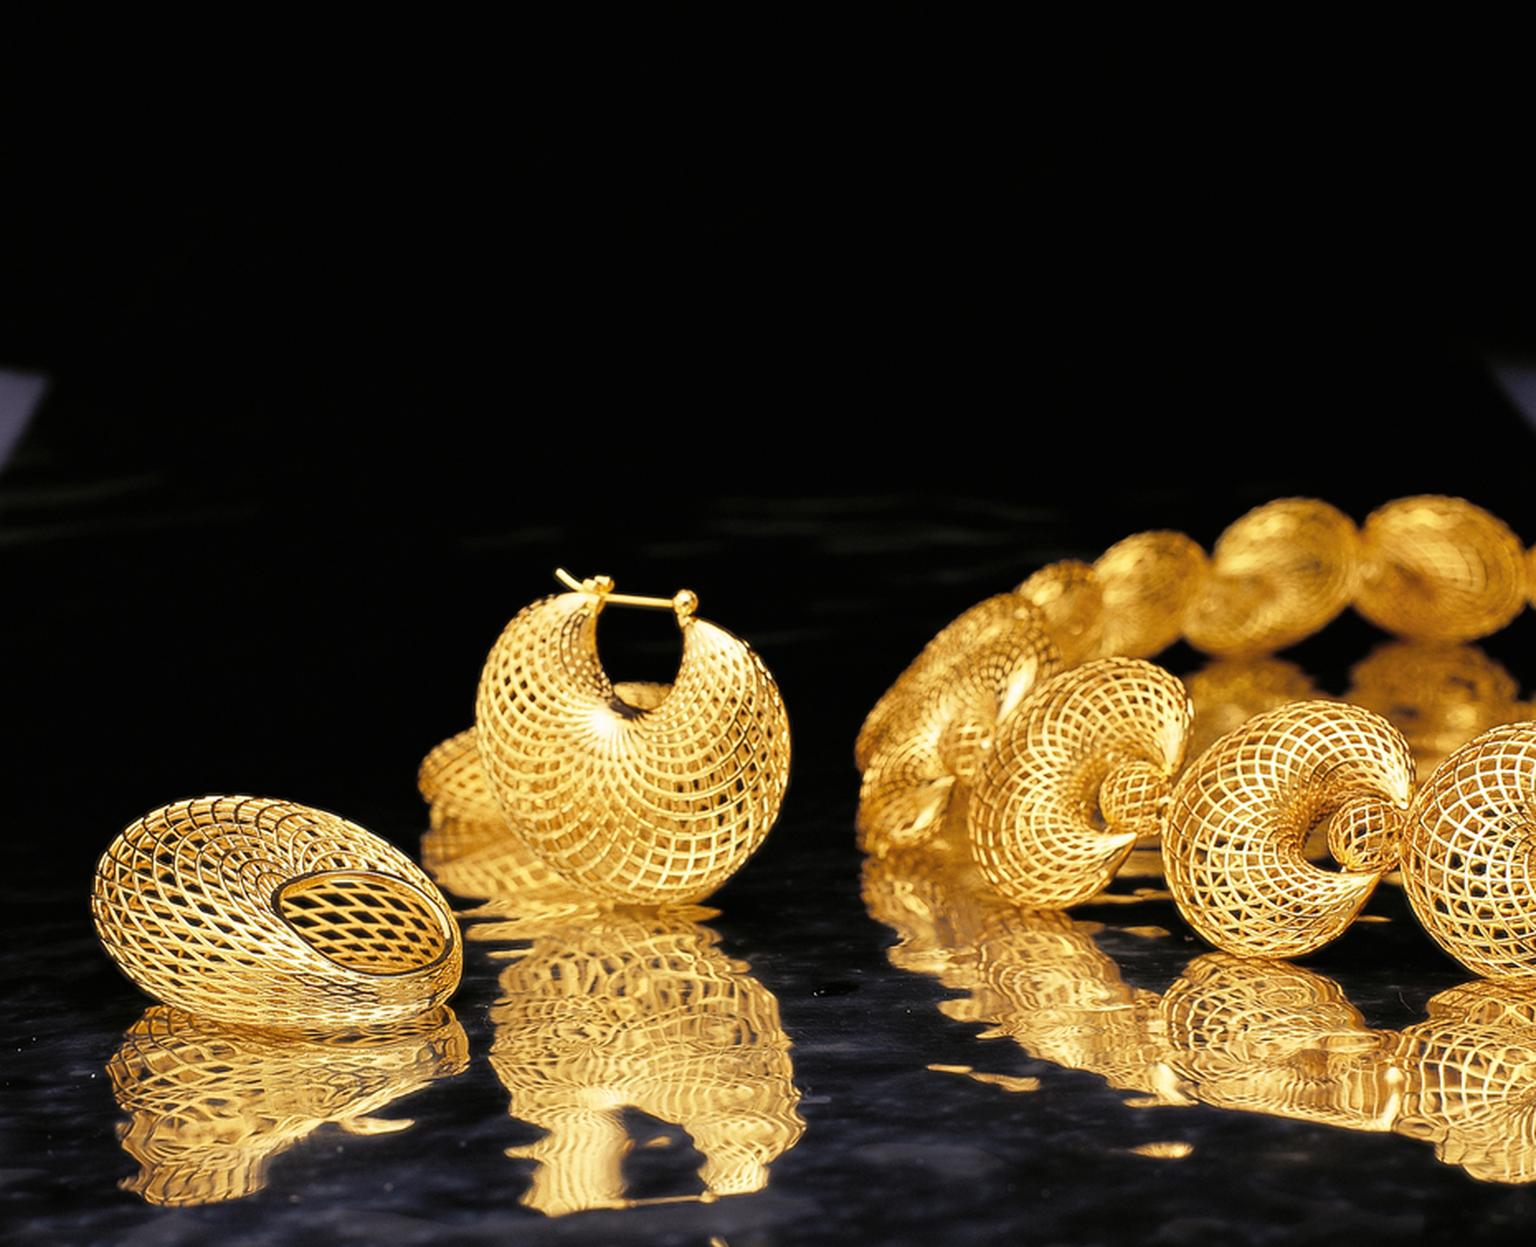 London exhibition: enjoy a unique showcase of Korean jewellery by acclaimed designer Myungji Ye this May